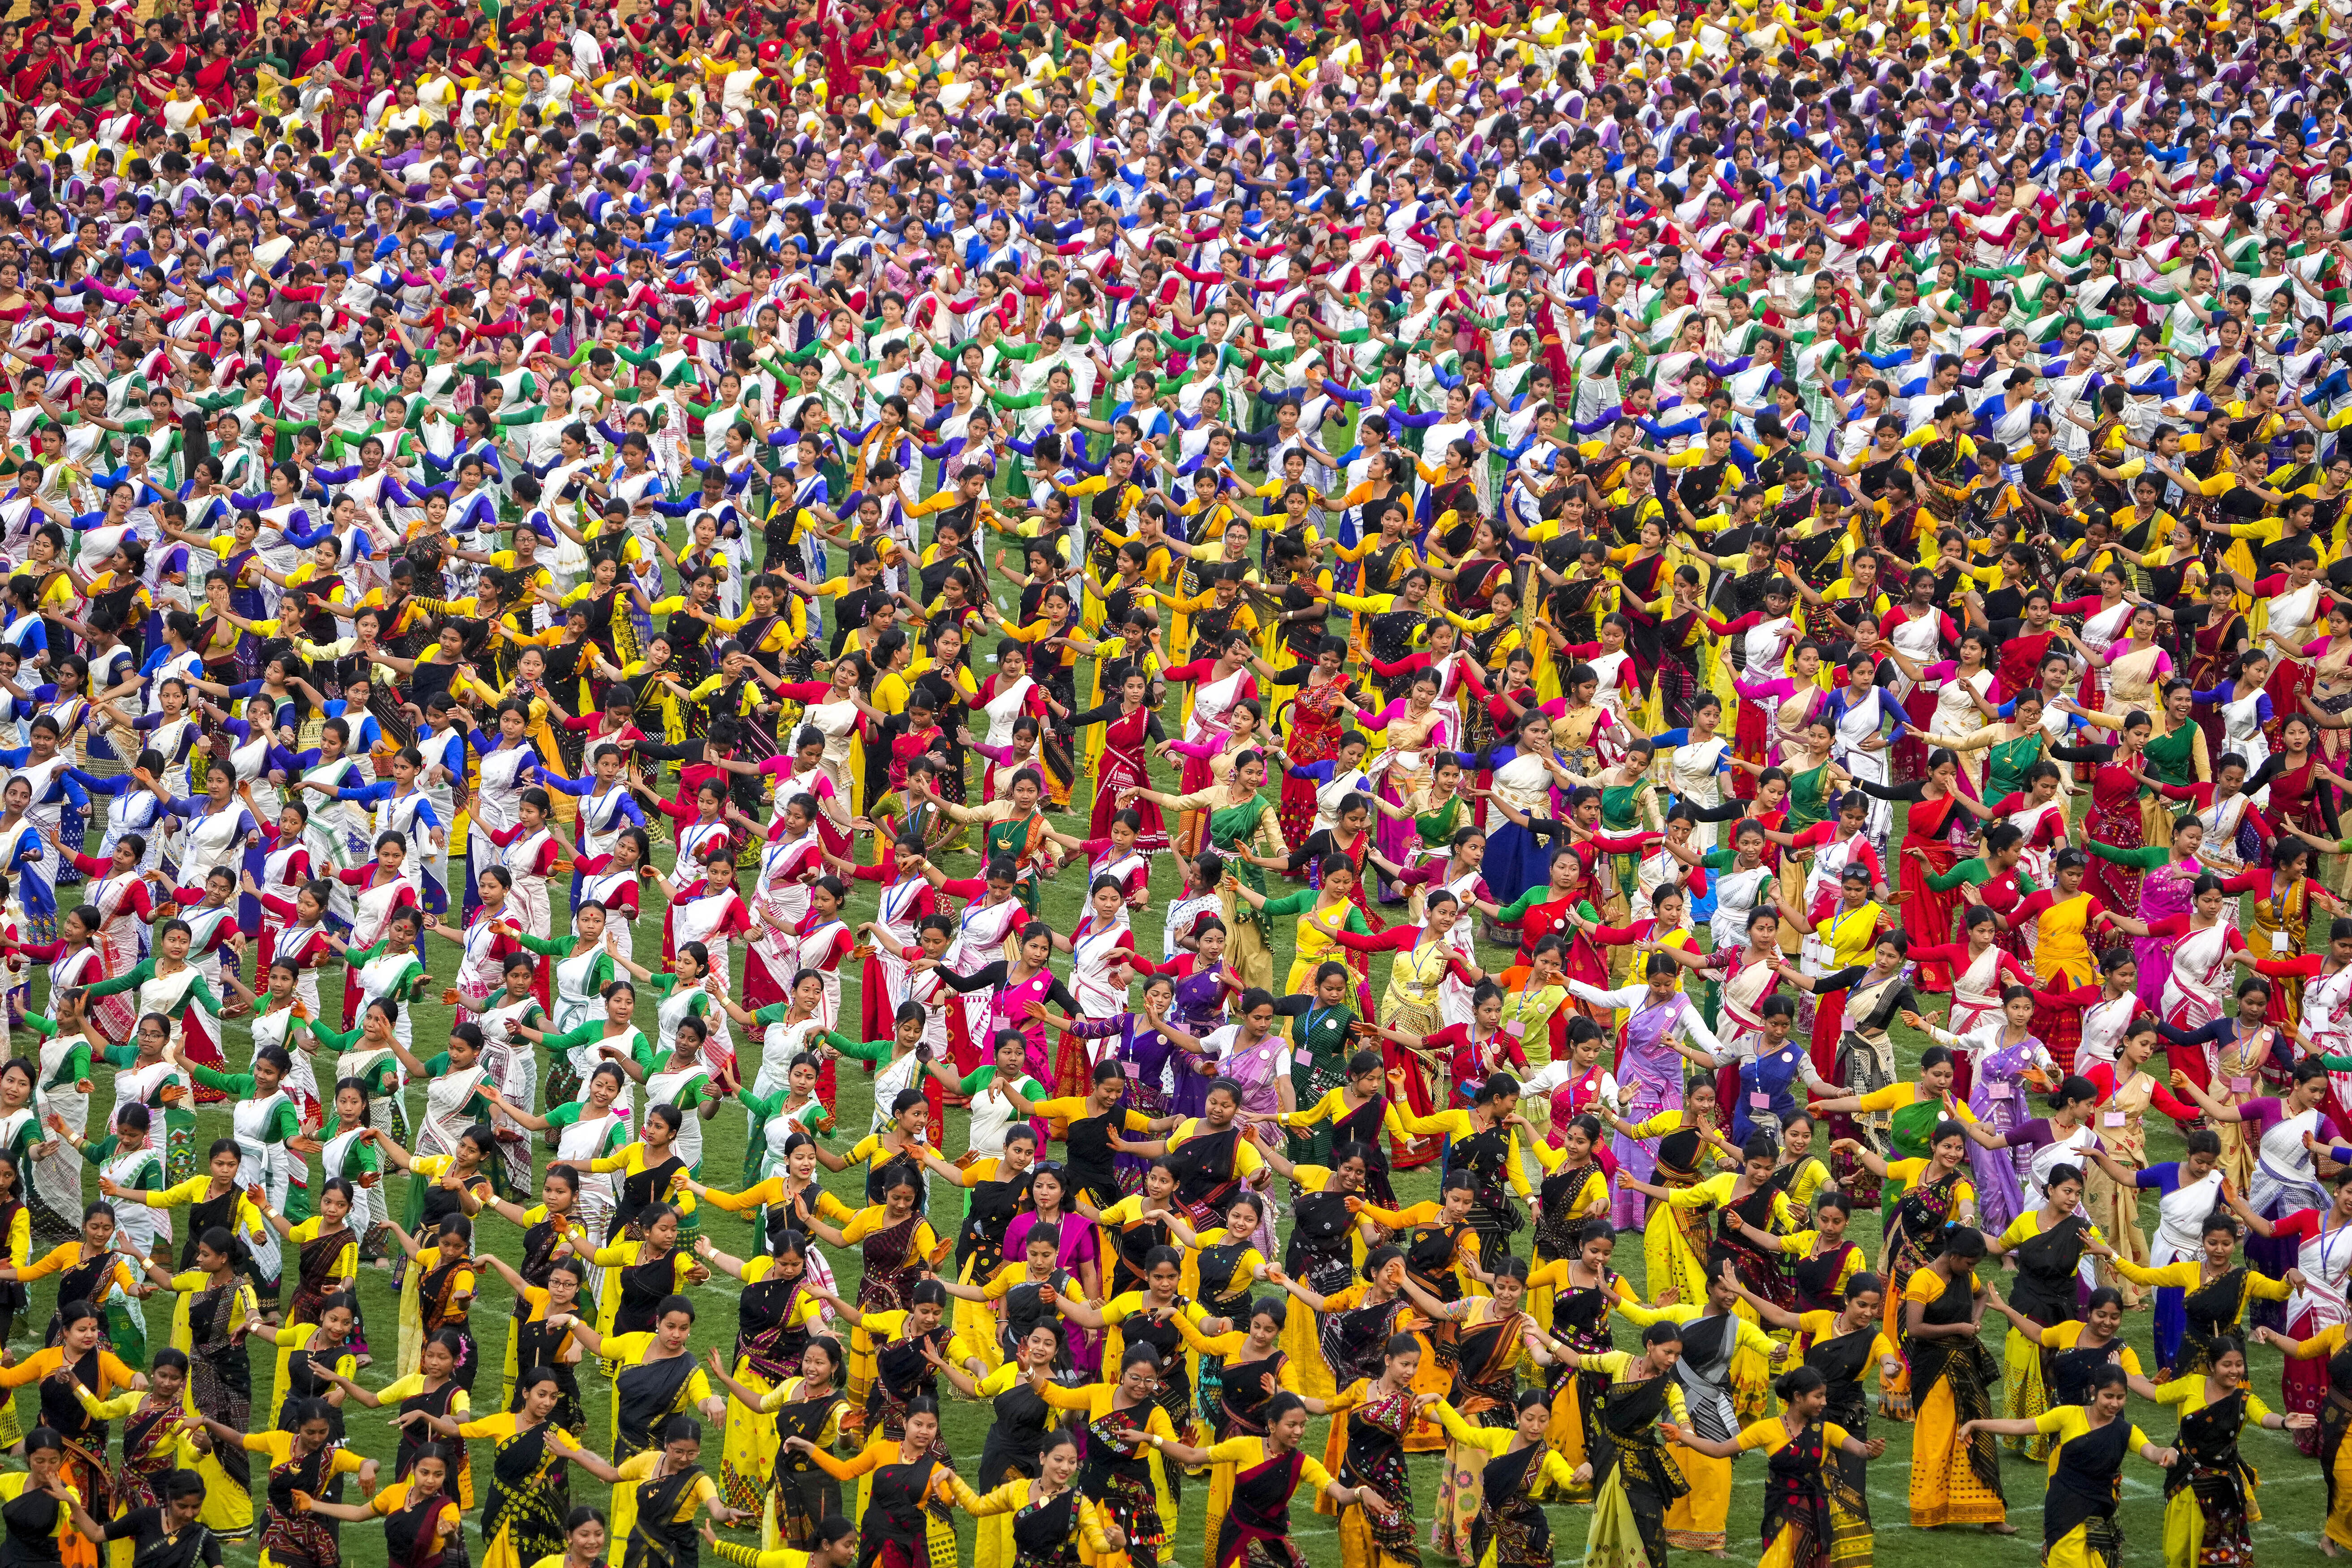 Assamese girls in traditional attire practice Bihu dance ahead of an event in Guwahati, India, Tuesday, April 11, 2023. Around 11,000 Bihu dancers and musicians will perform together for Guinness World Record in the largest folk dance performance category on April 14. (AP Photo/Anupam Nath)

Associated Press/LaPresse
Only Italy and Spain